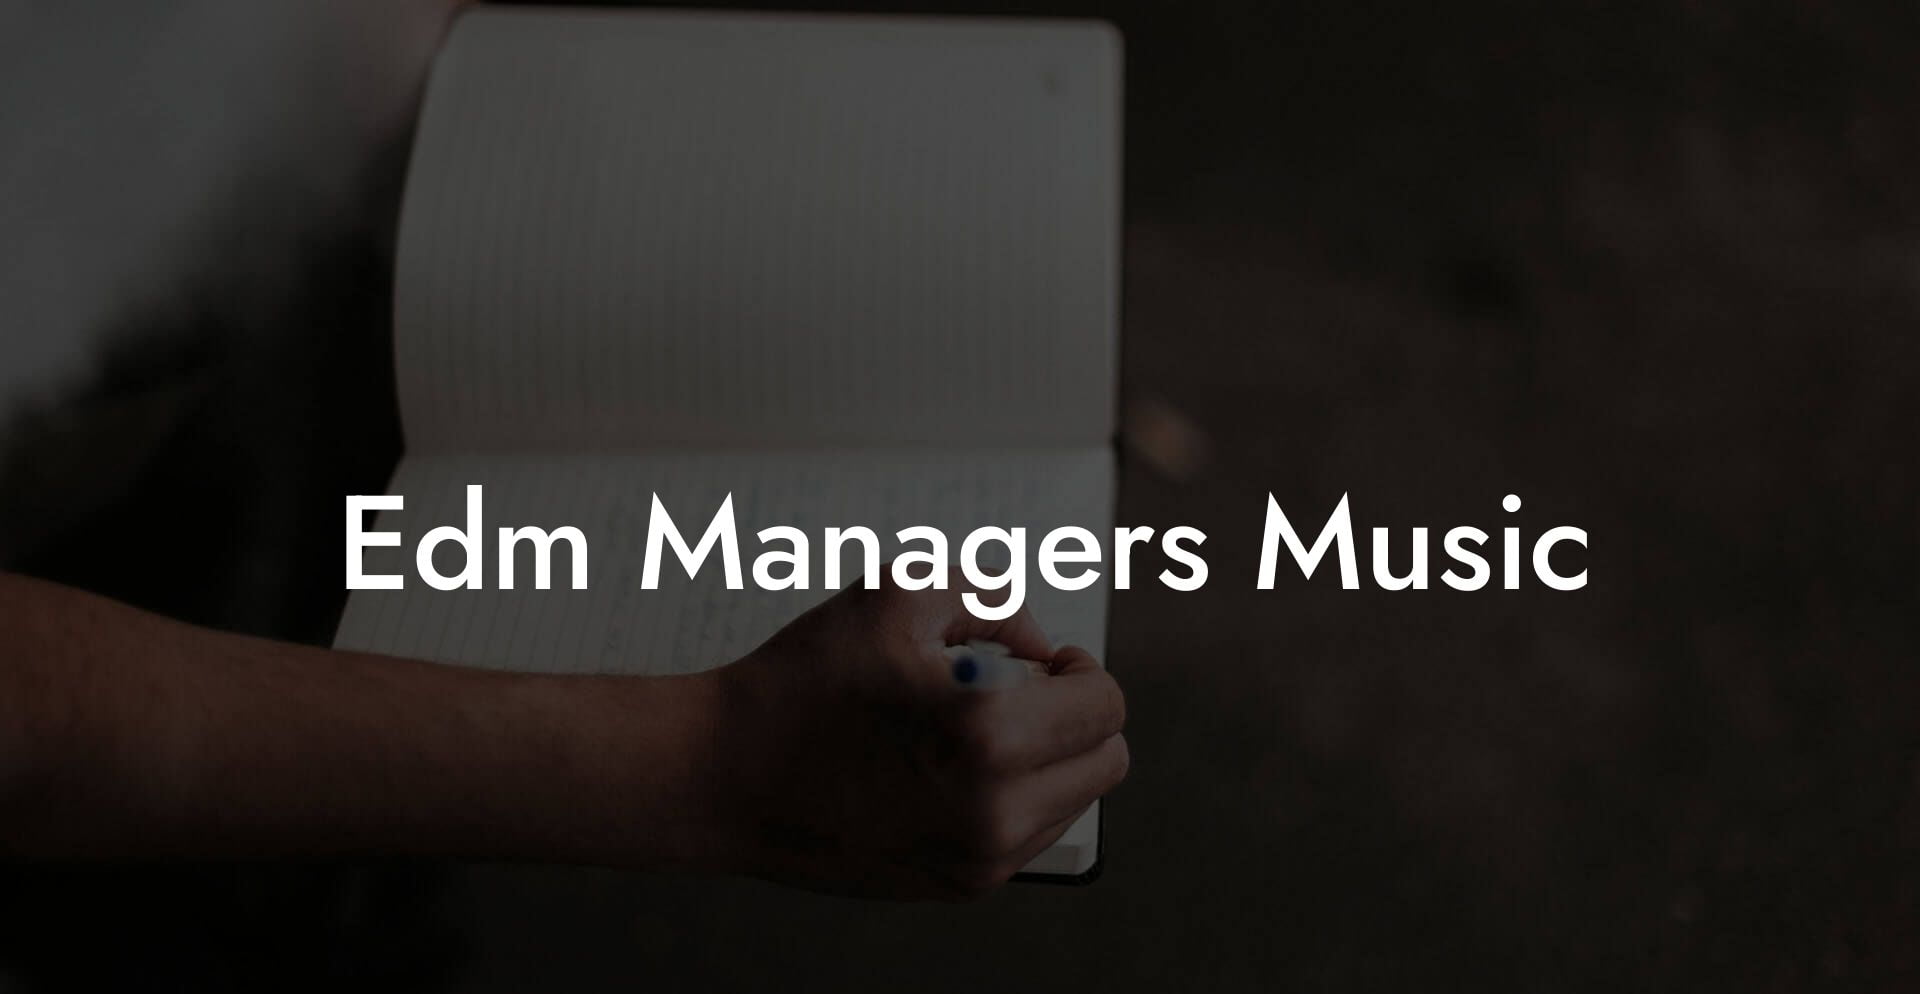 Edm Managers Music